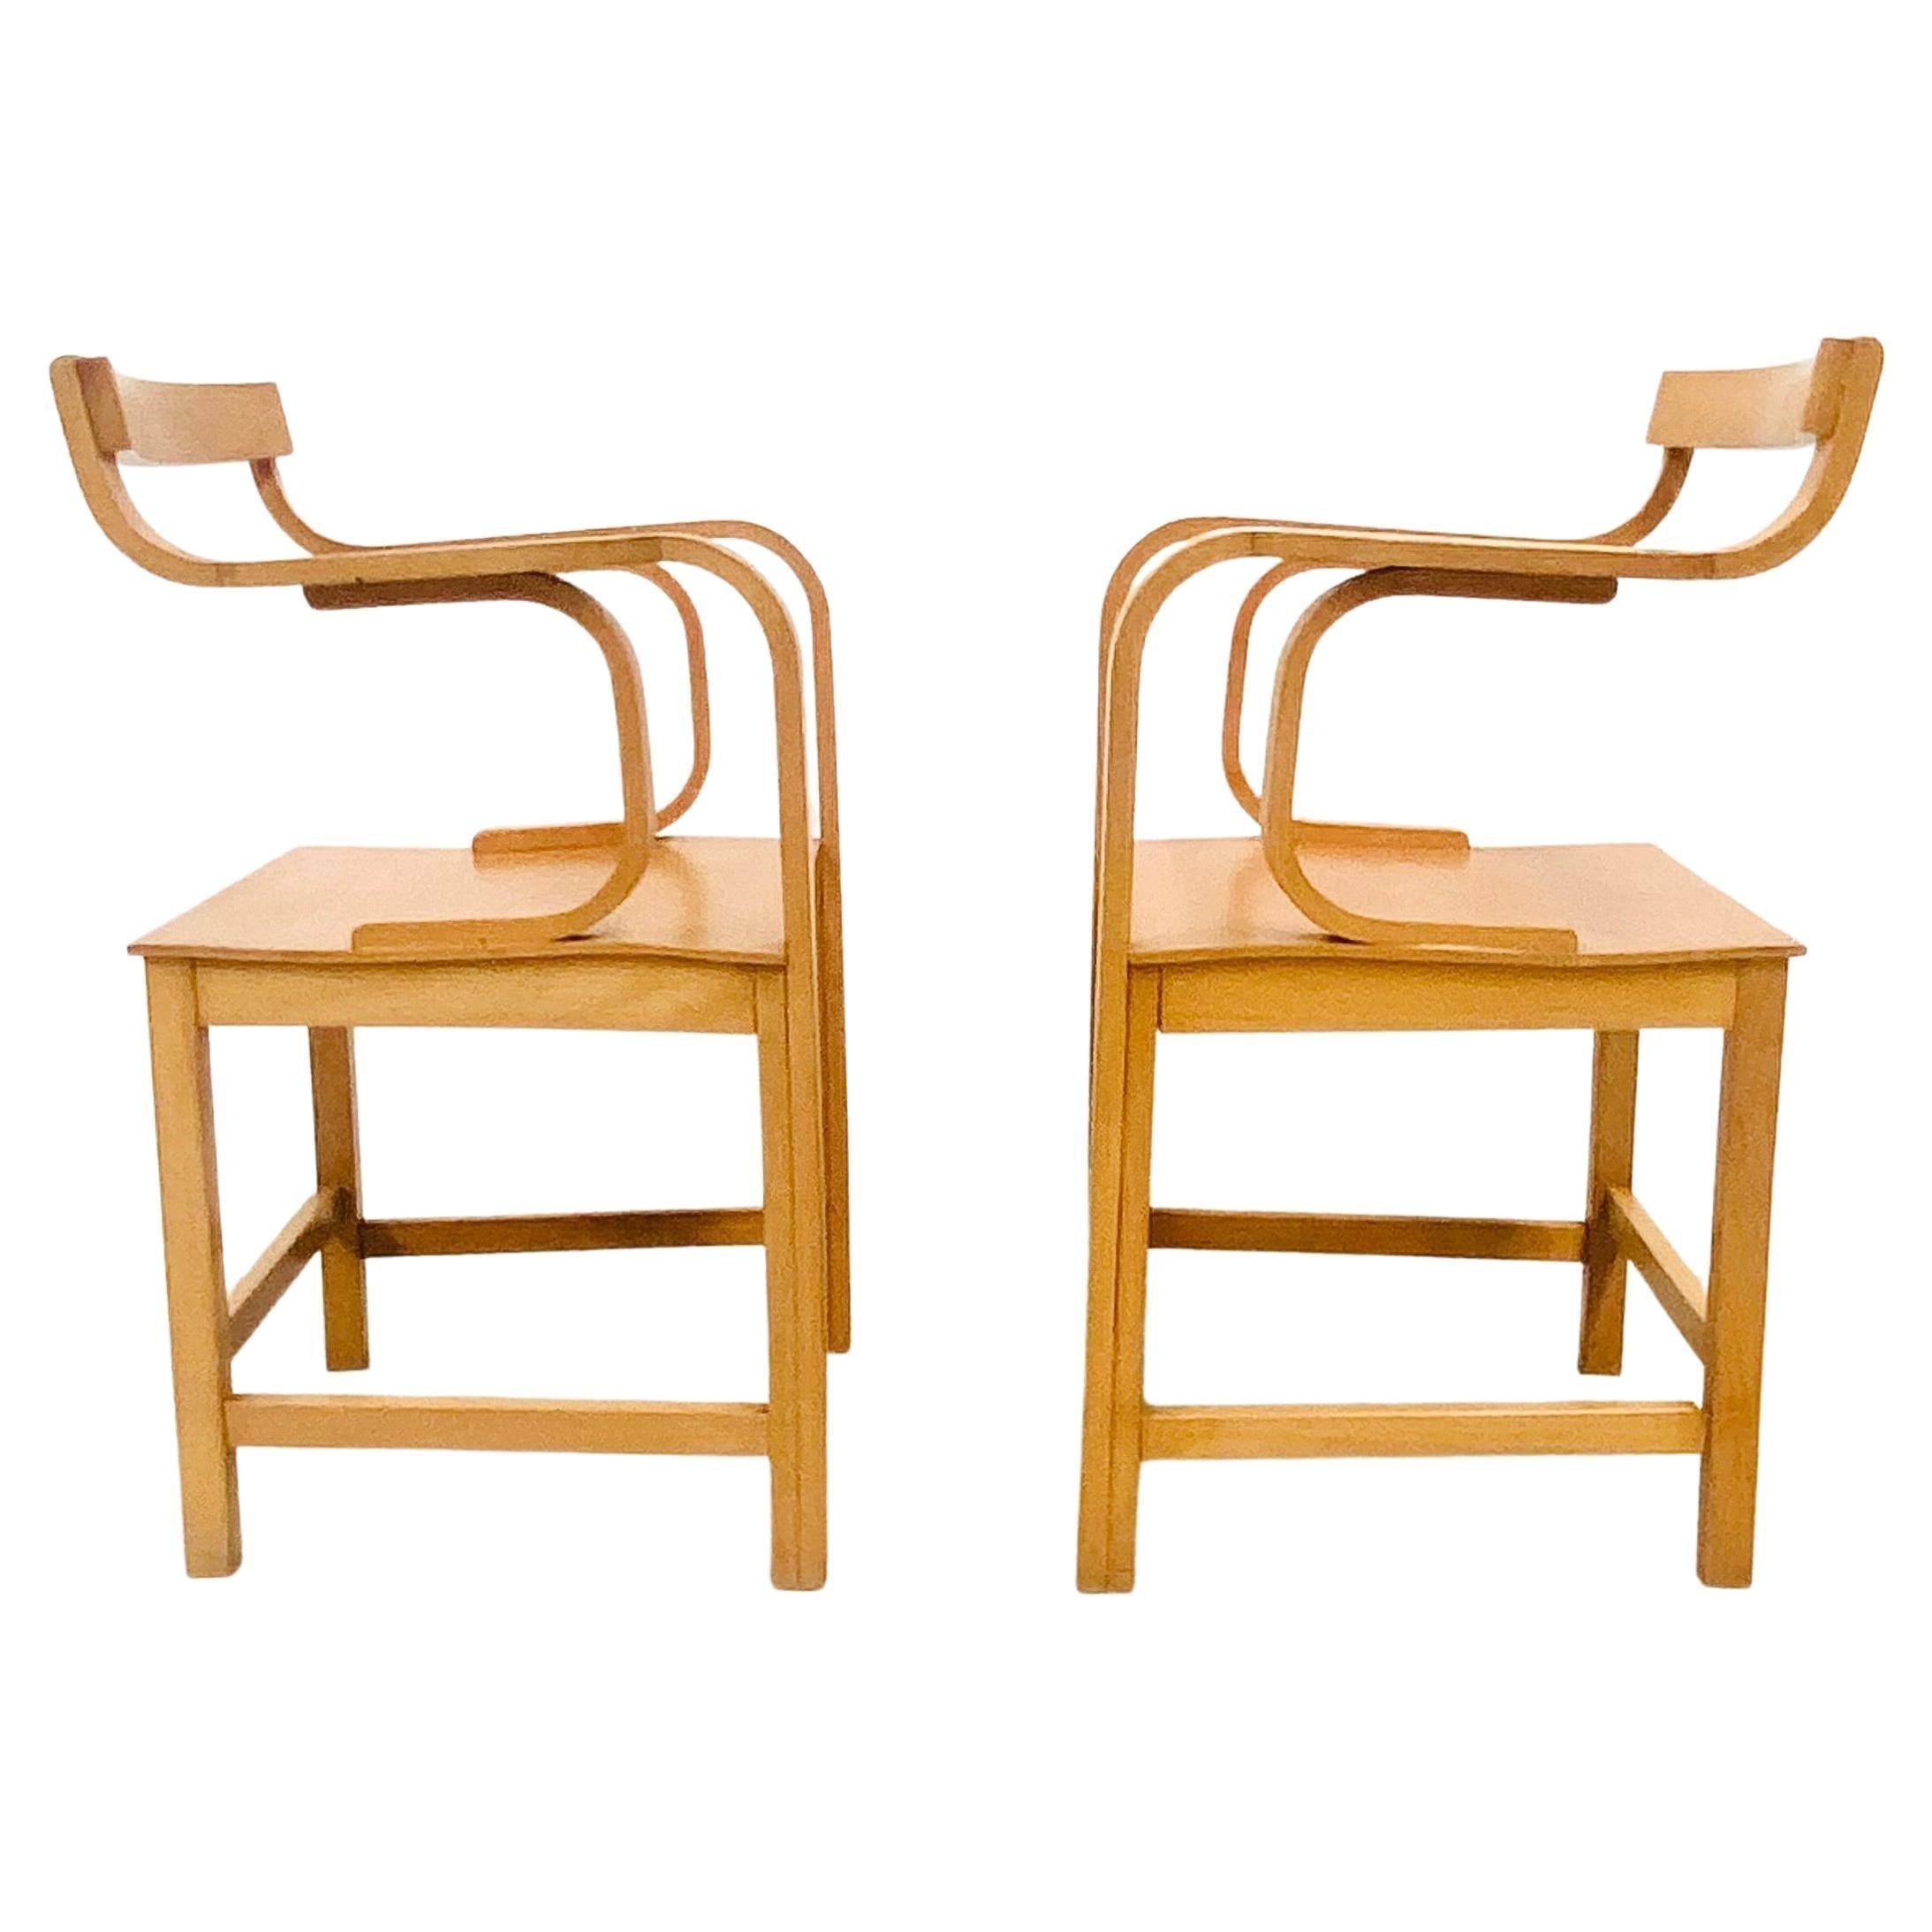 Vintage Dutch Plywood Beech Armchairs by Enraf Nonius Delft, 1970s For Sale 1